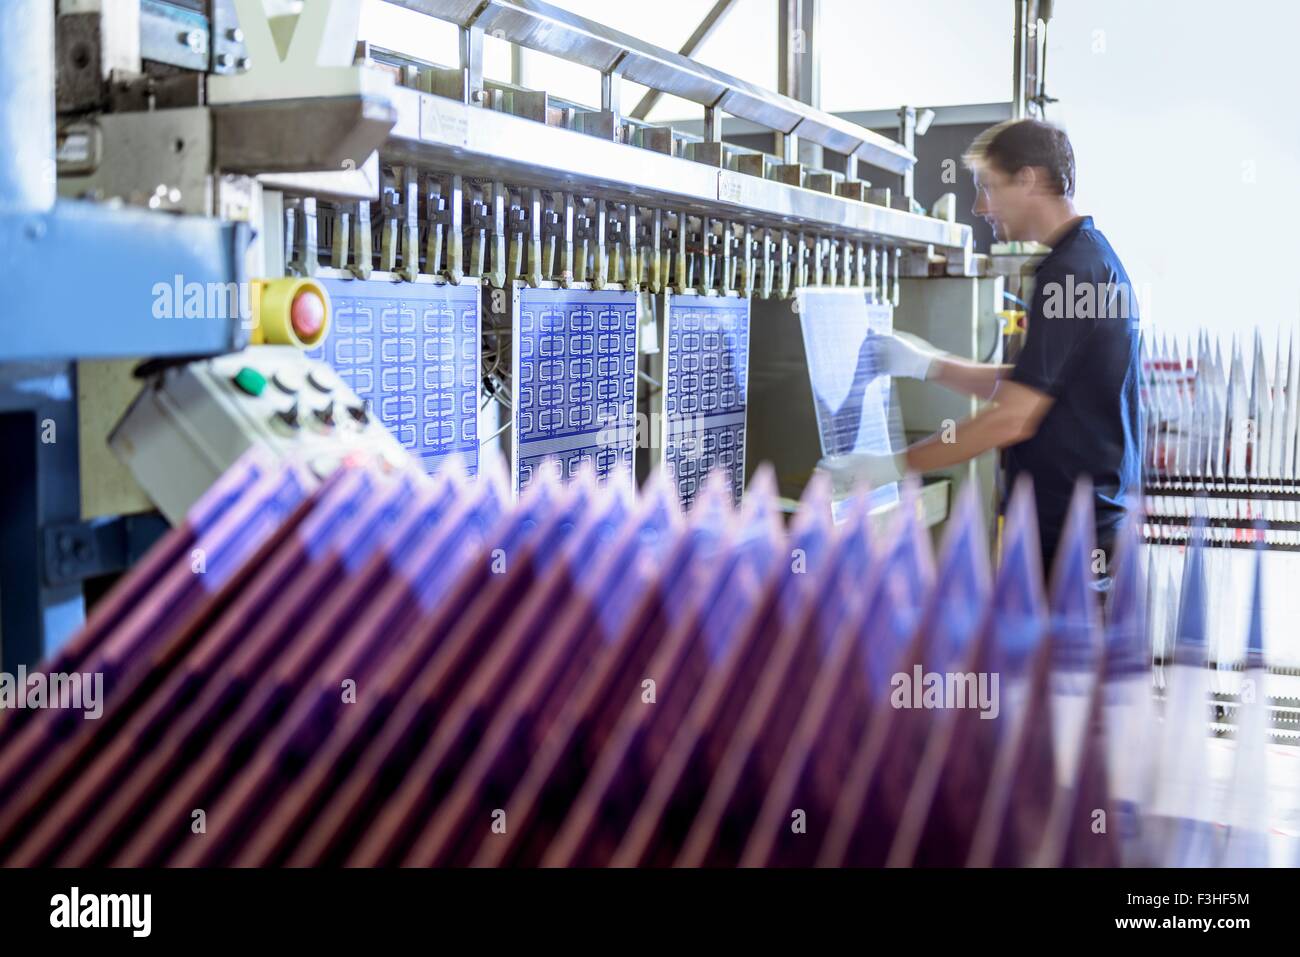 Worker loading circuit boards into processing machine in circuit board factory Stock Photo